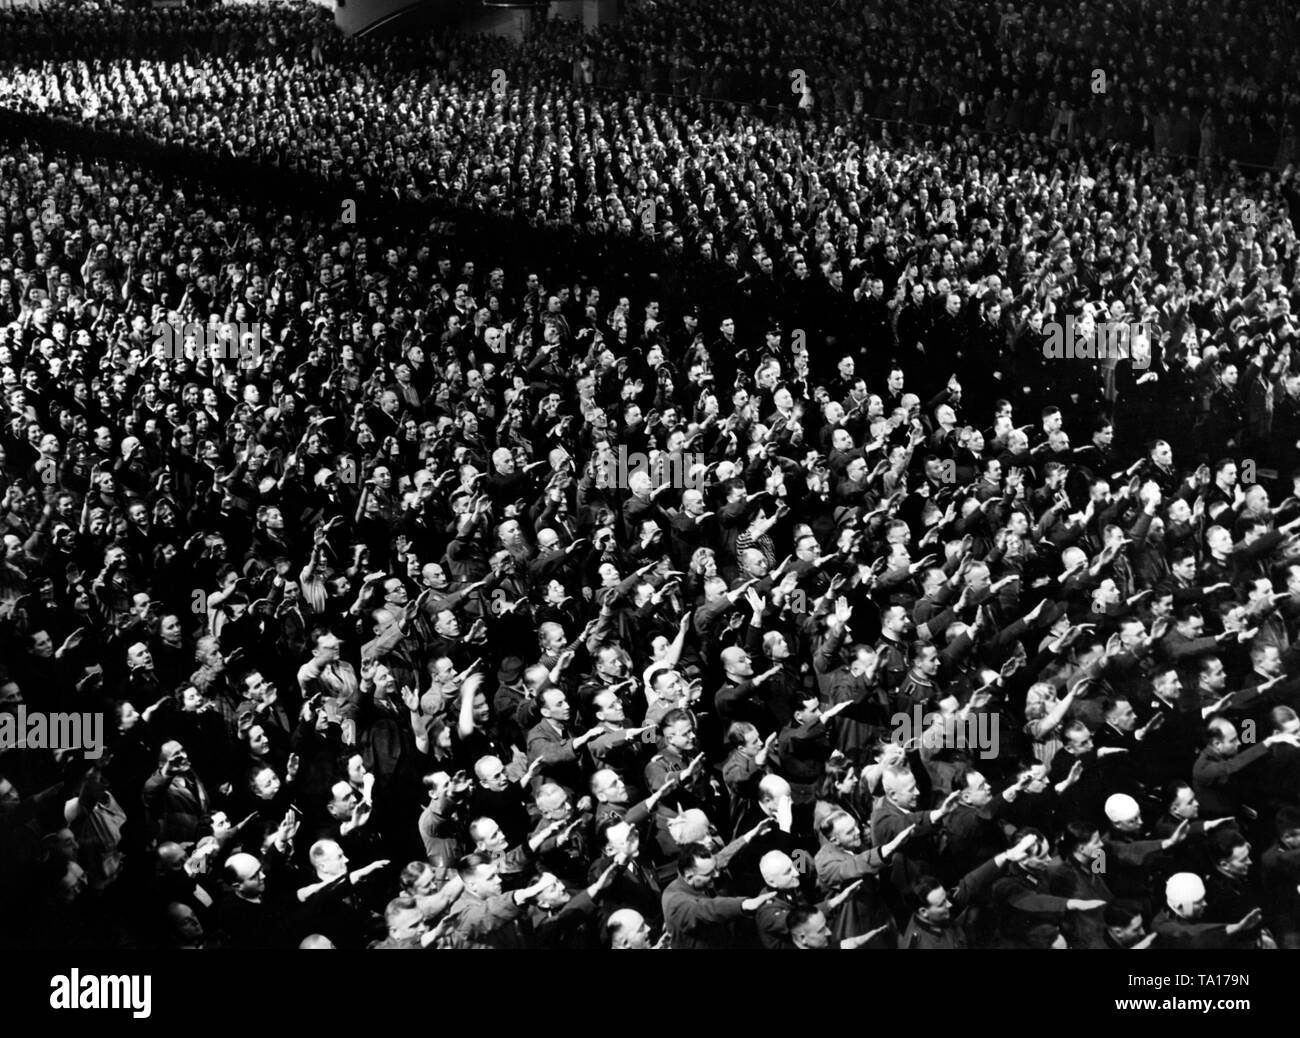 View of the audience at a mass rally on the occasion of the opening of the 3rd Kriegswinterhilfswerk in the Berlin Sportpalast, where Adolf Hitler gave a speech. The crowd has risen, and performs the Hitler salute. Stock Photo